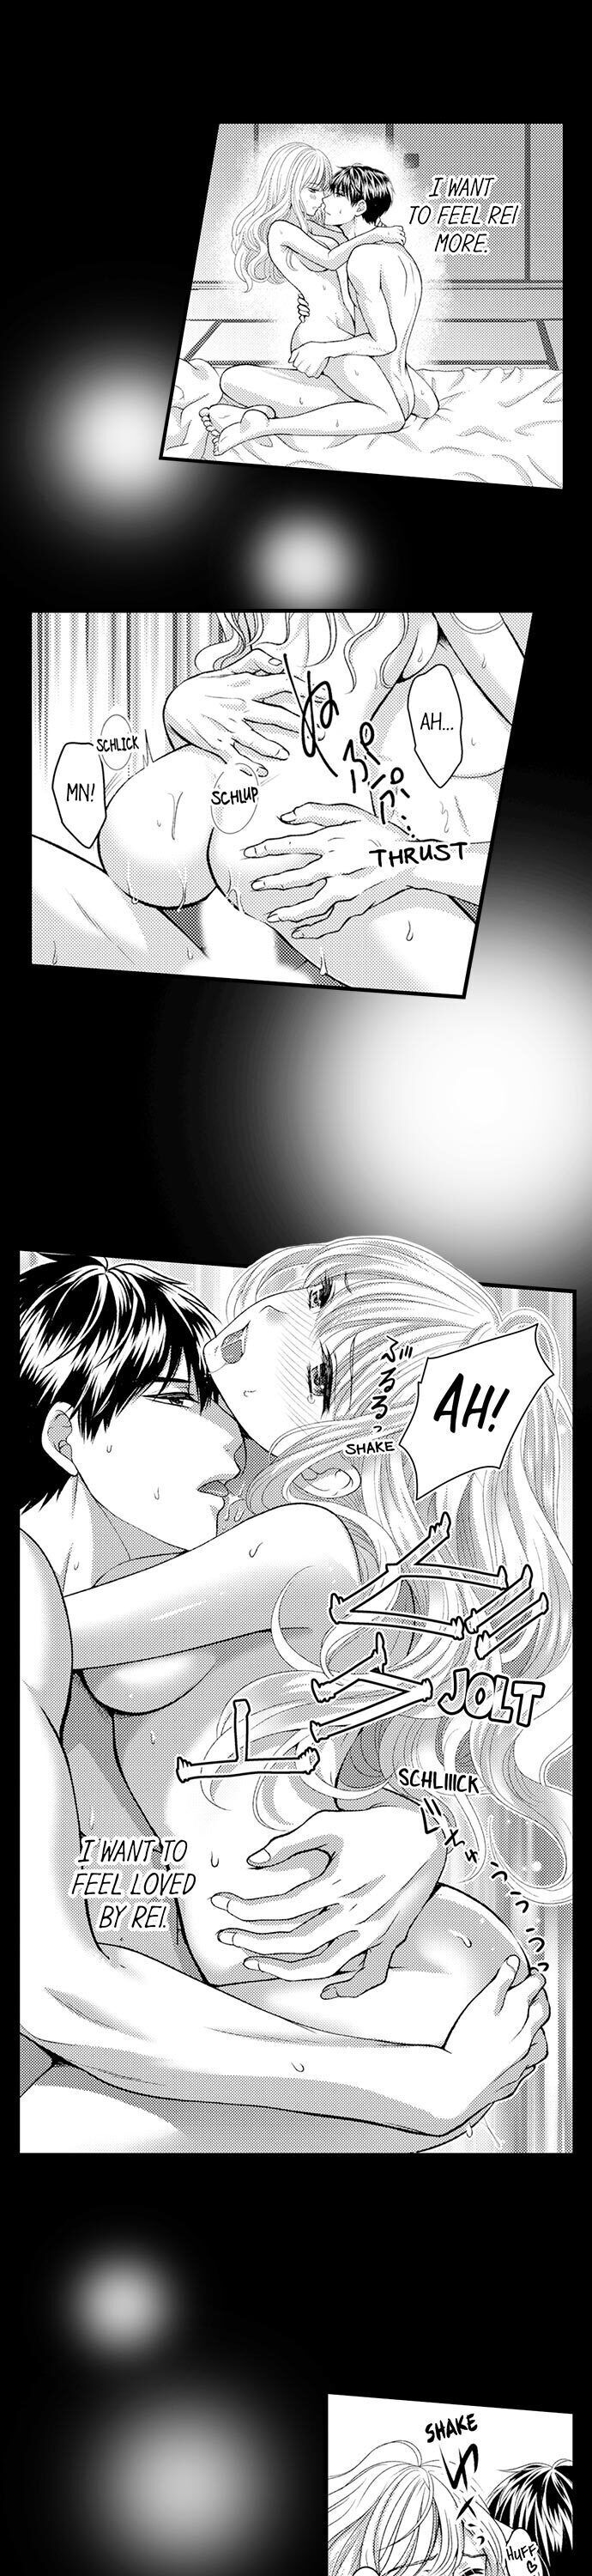 Cheating in a One-Sided Relationship Chapter 15 - Page 8